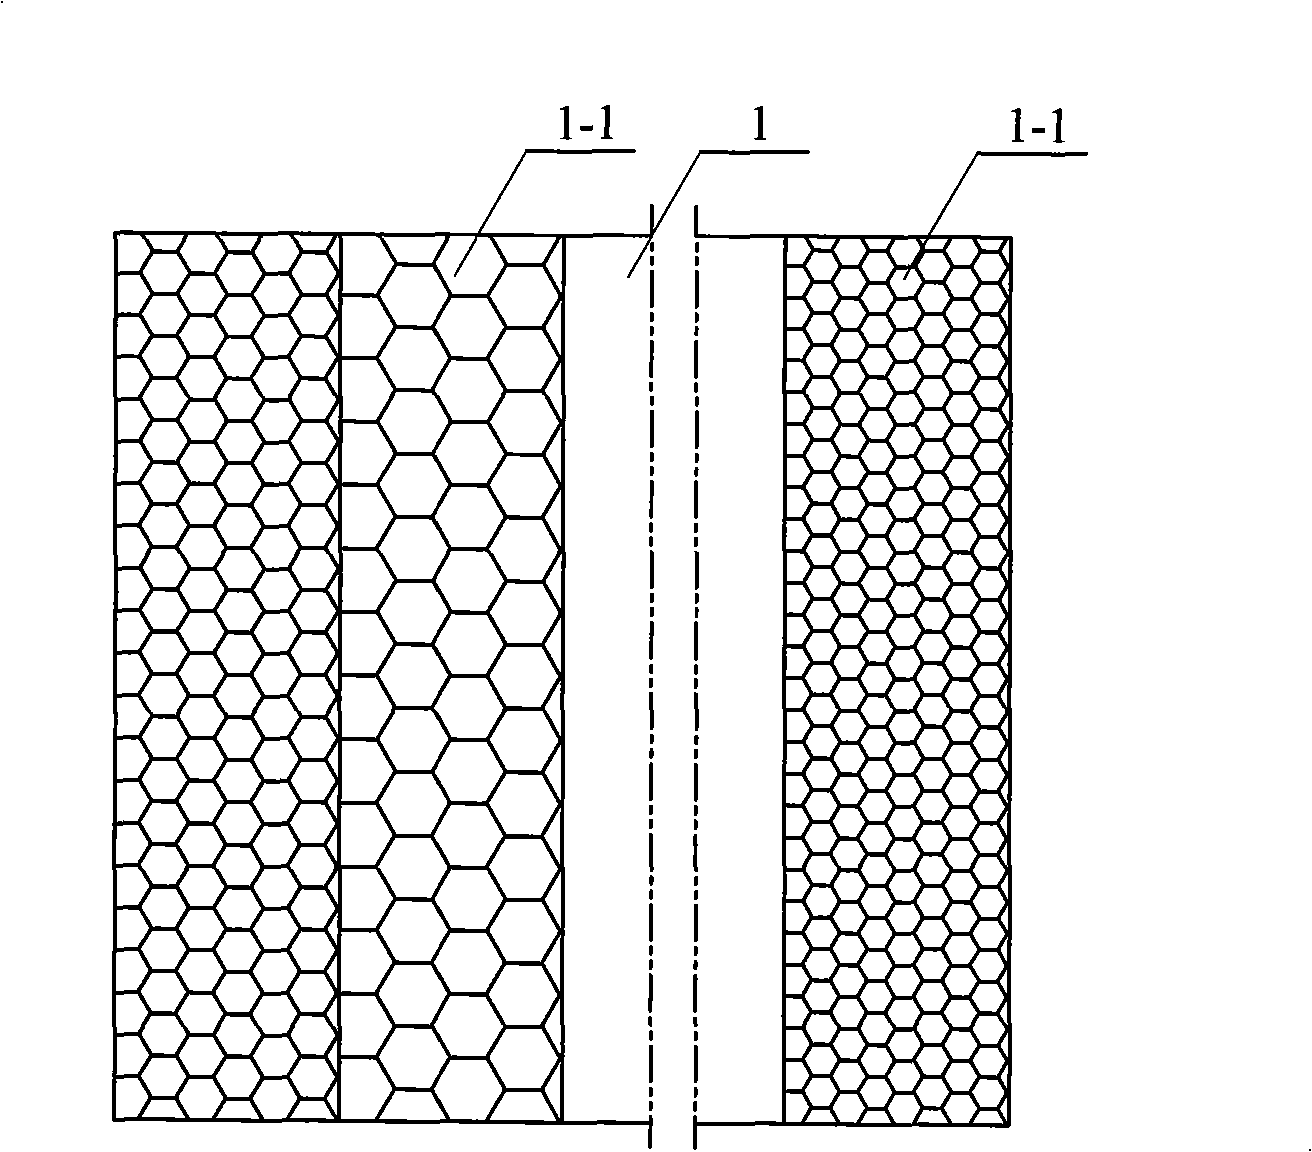 Parallel type honeycomb material power absorber